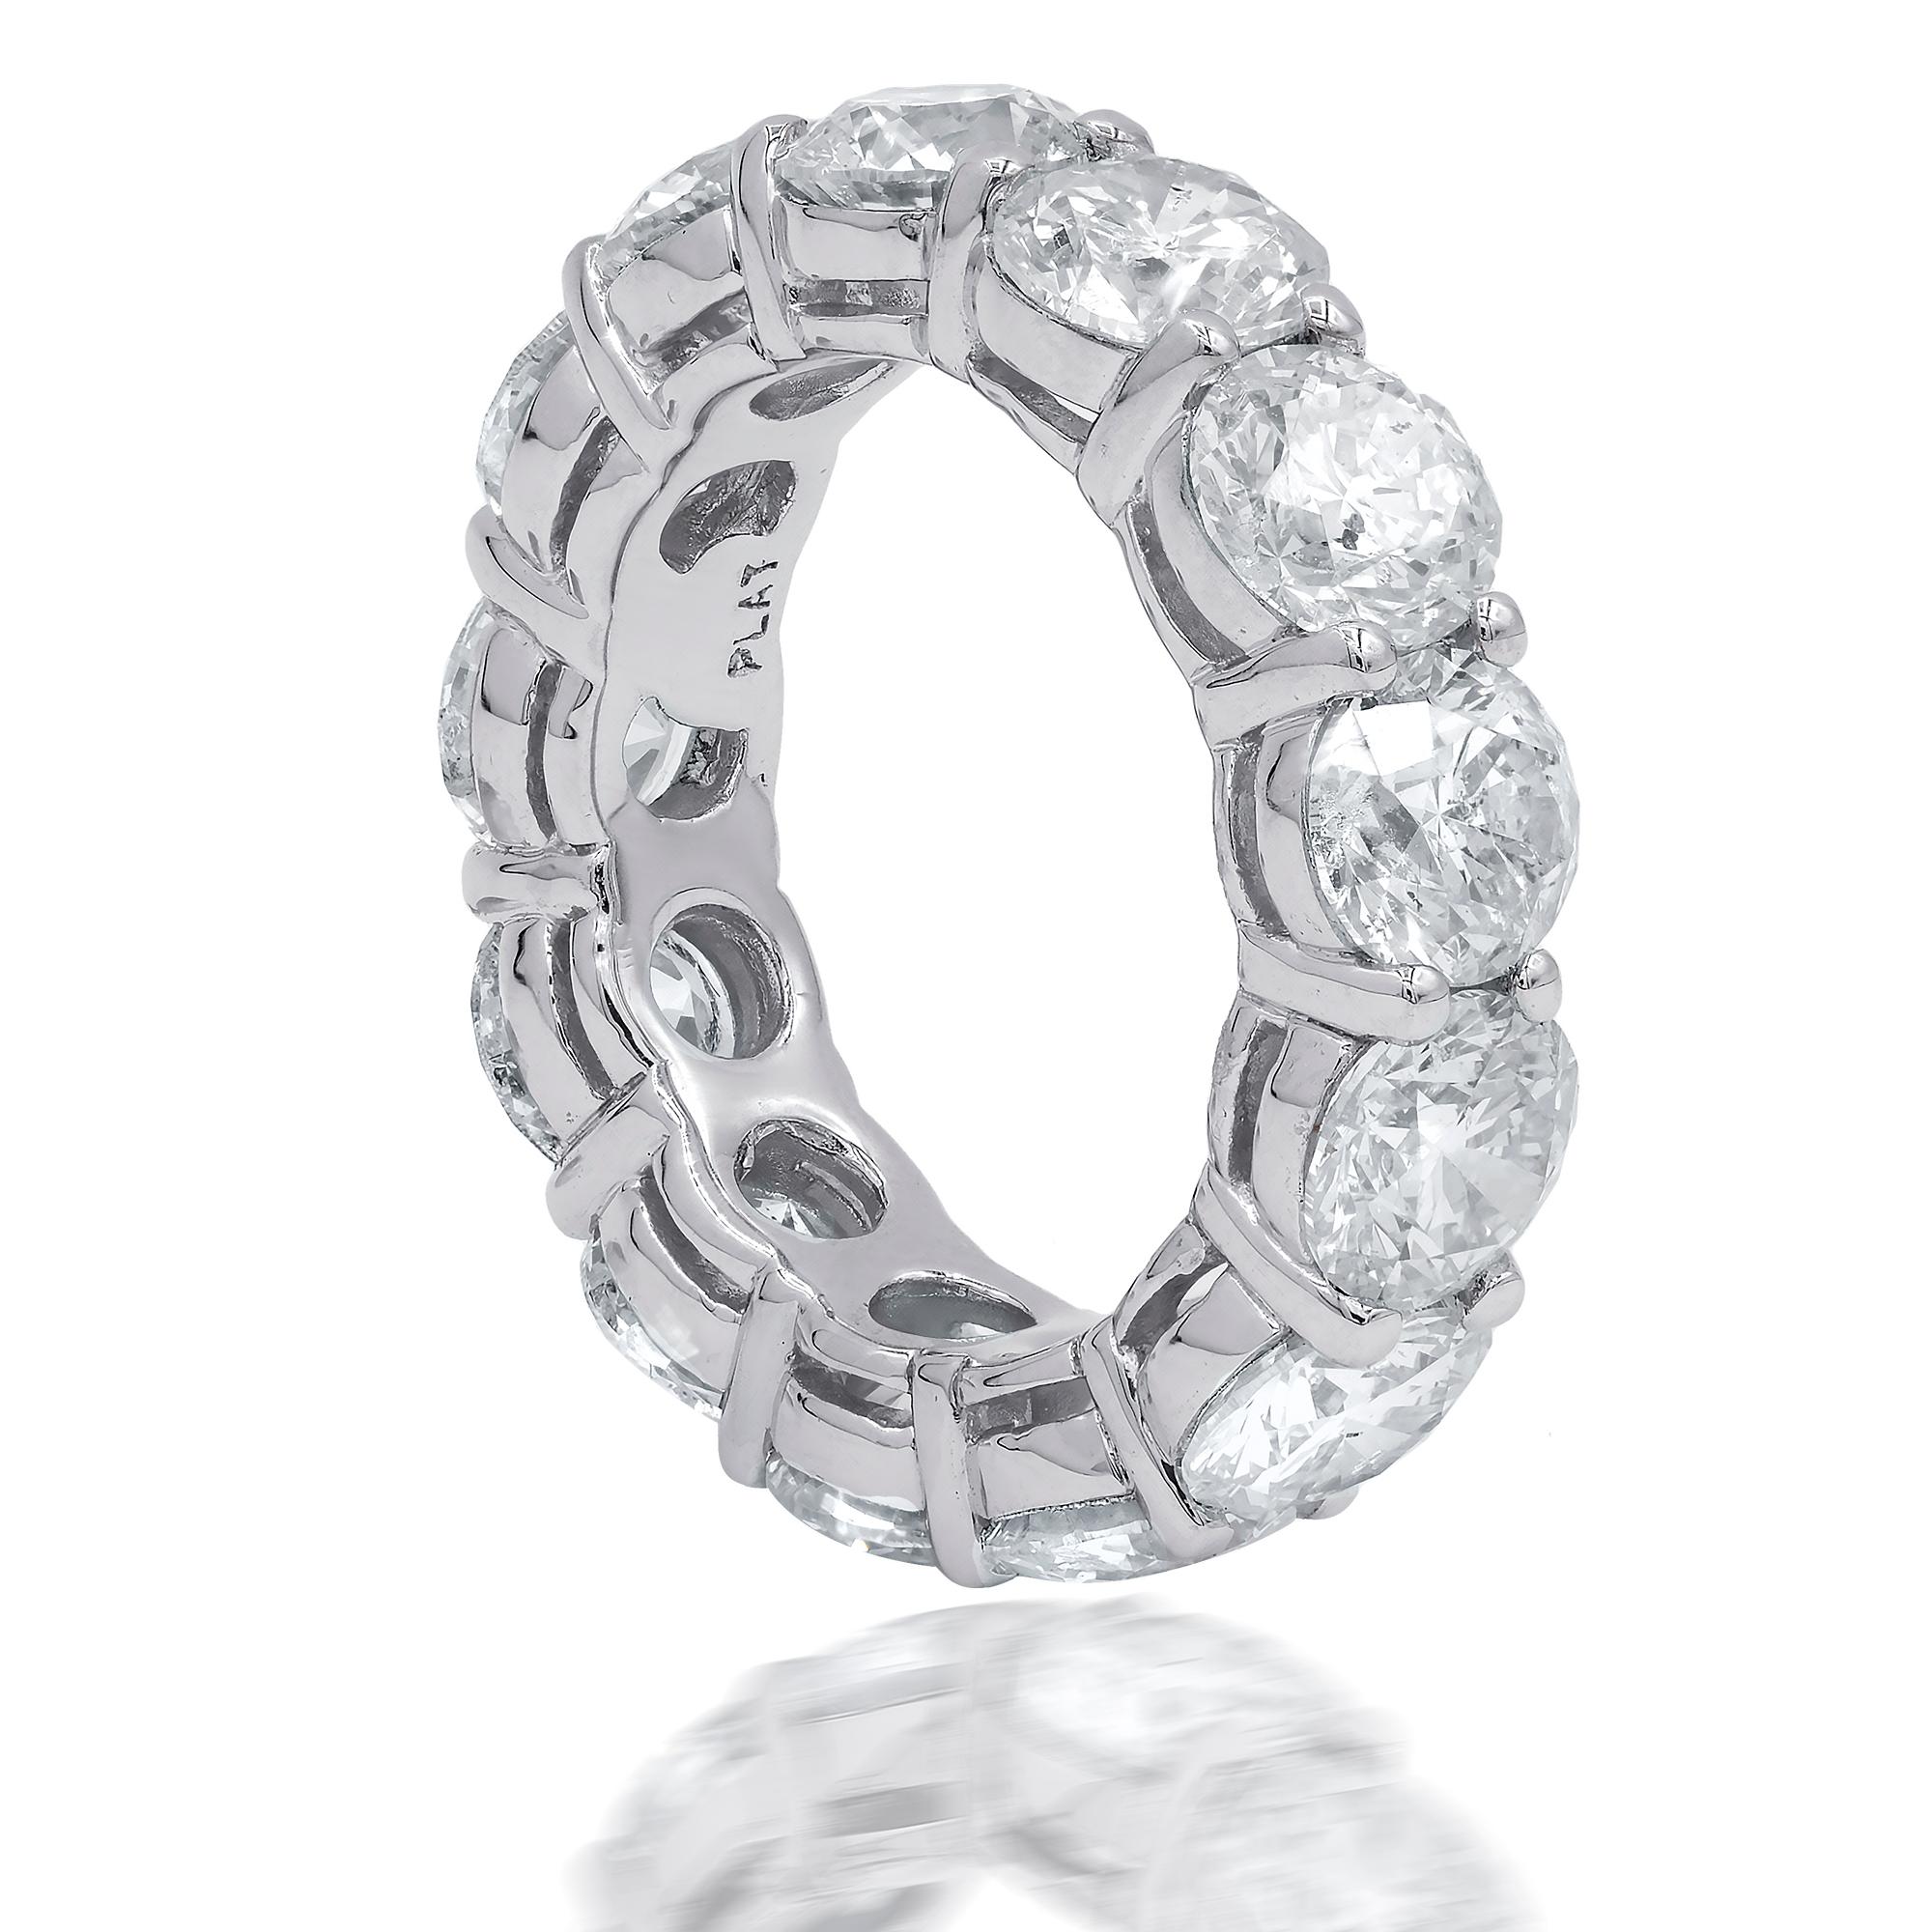  Platinum etarnity band all the way around features 9.30ct of round diamonds
Diana M. is a leading supplier of top-quality fine jewelry for over 35 years.
Diana M is one-stop shop for all your jewelry shopping, carrying line of diamond rings,